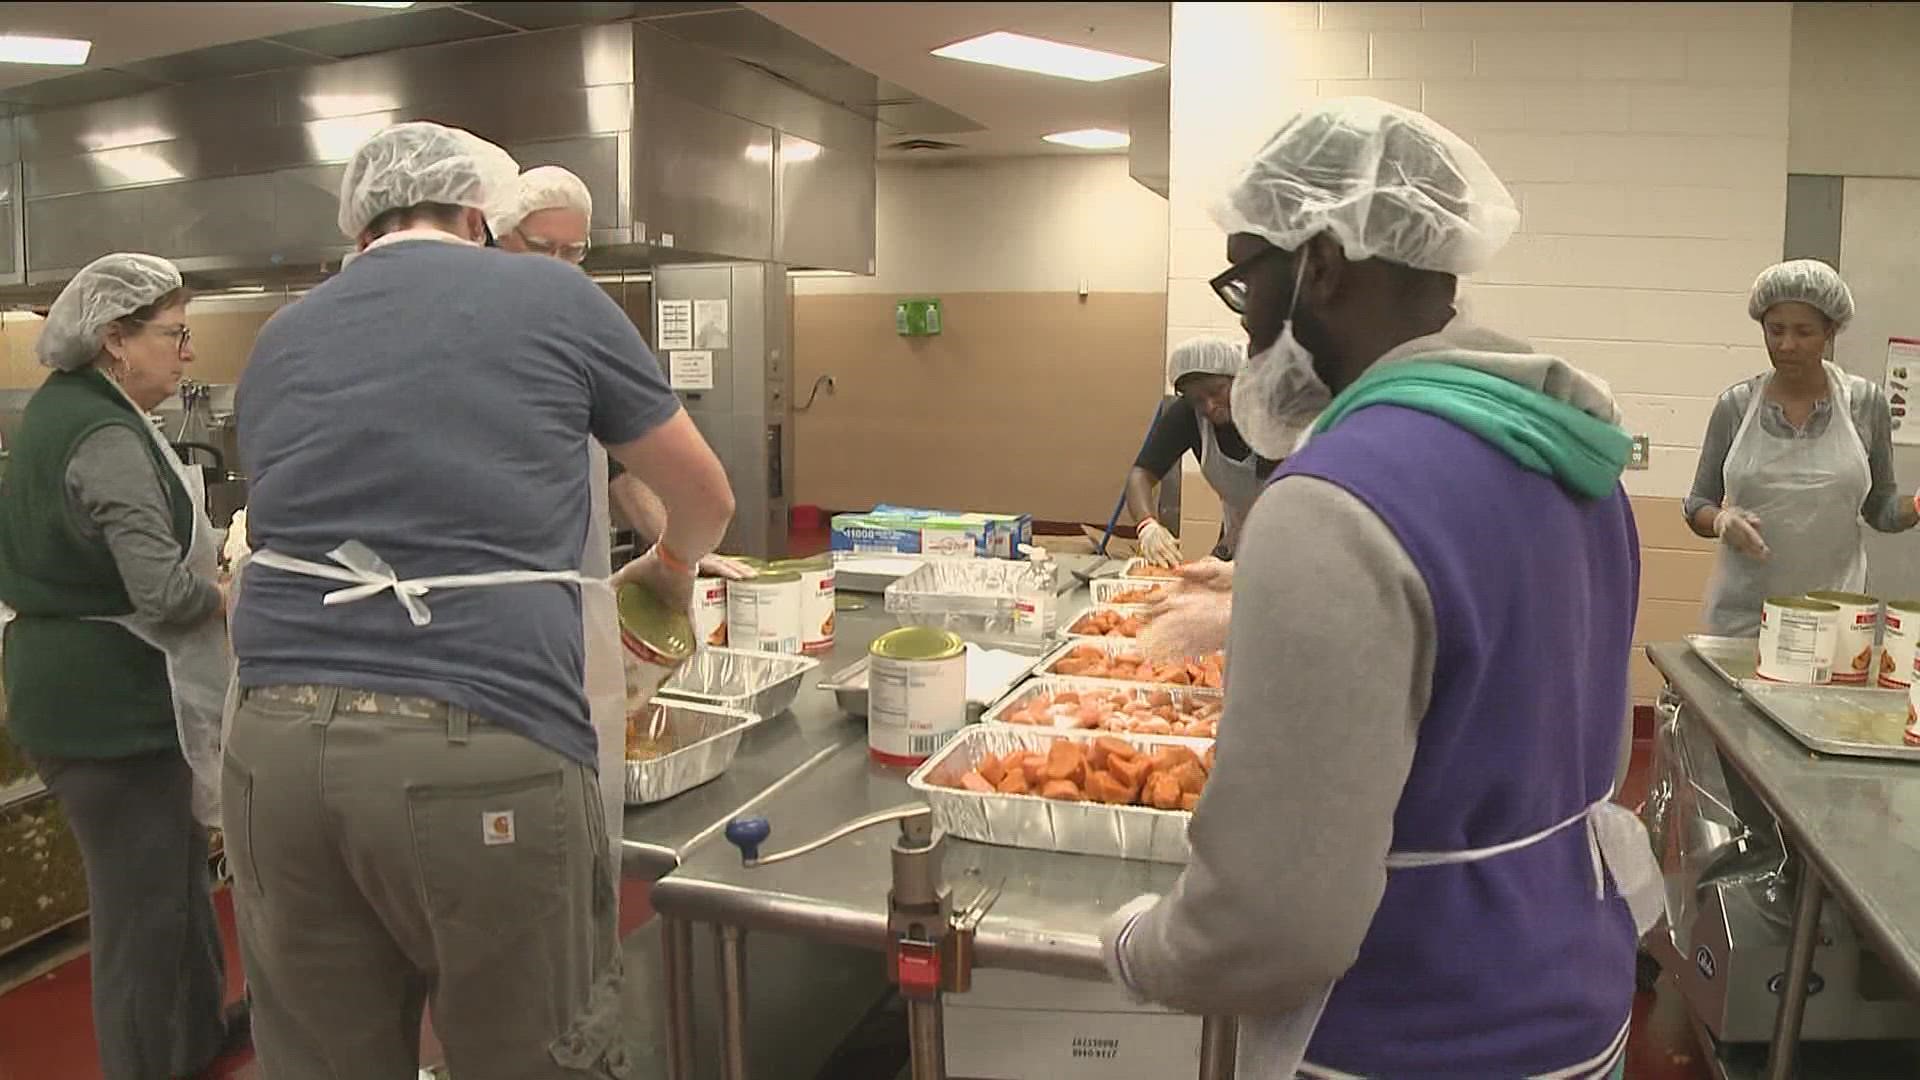 With less than 24 hours to go, one of the largest nonprofits in the metro Atlanta area is getting ready to serve hundreds of people for Thanksgiving.